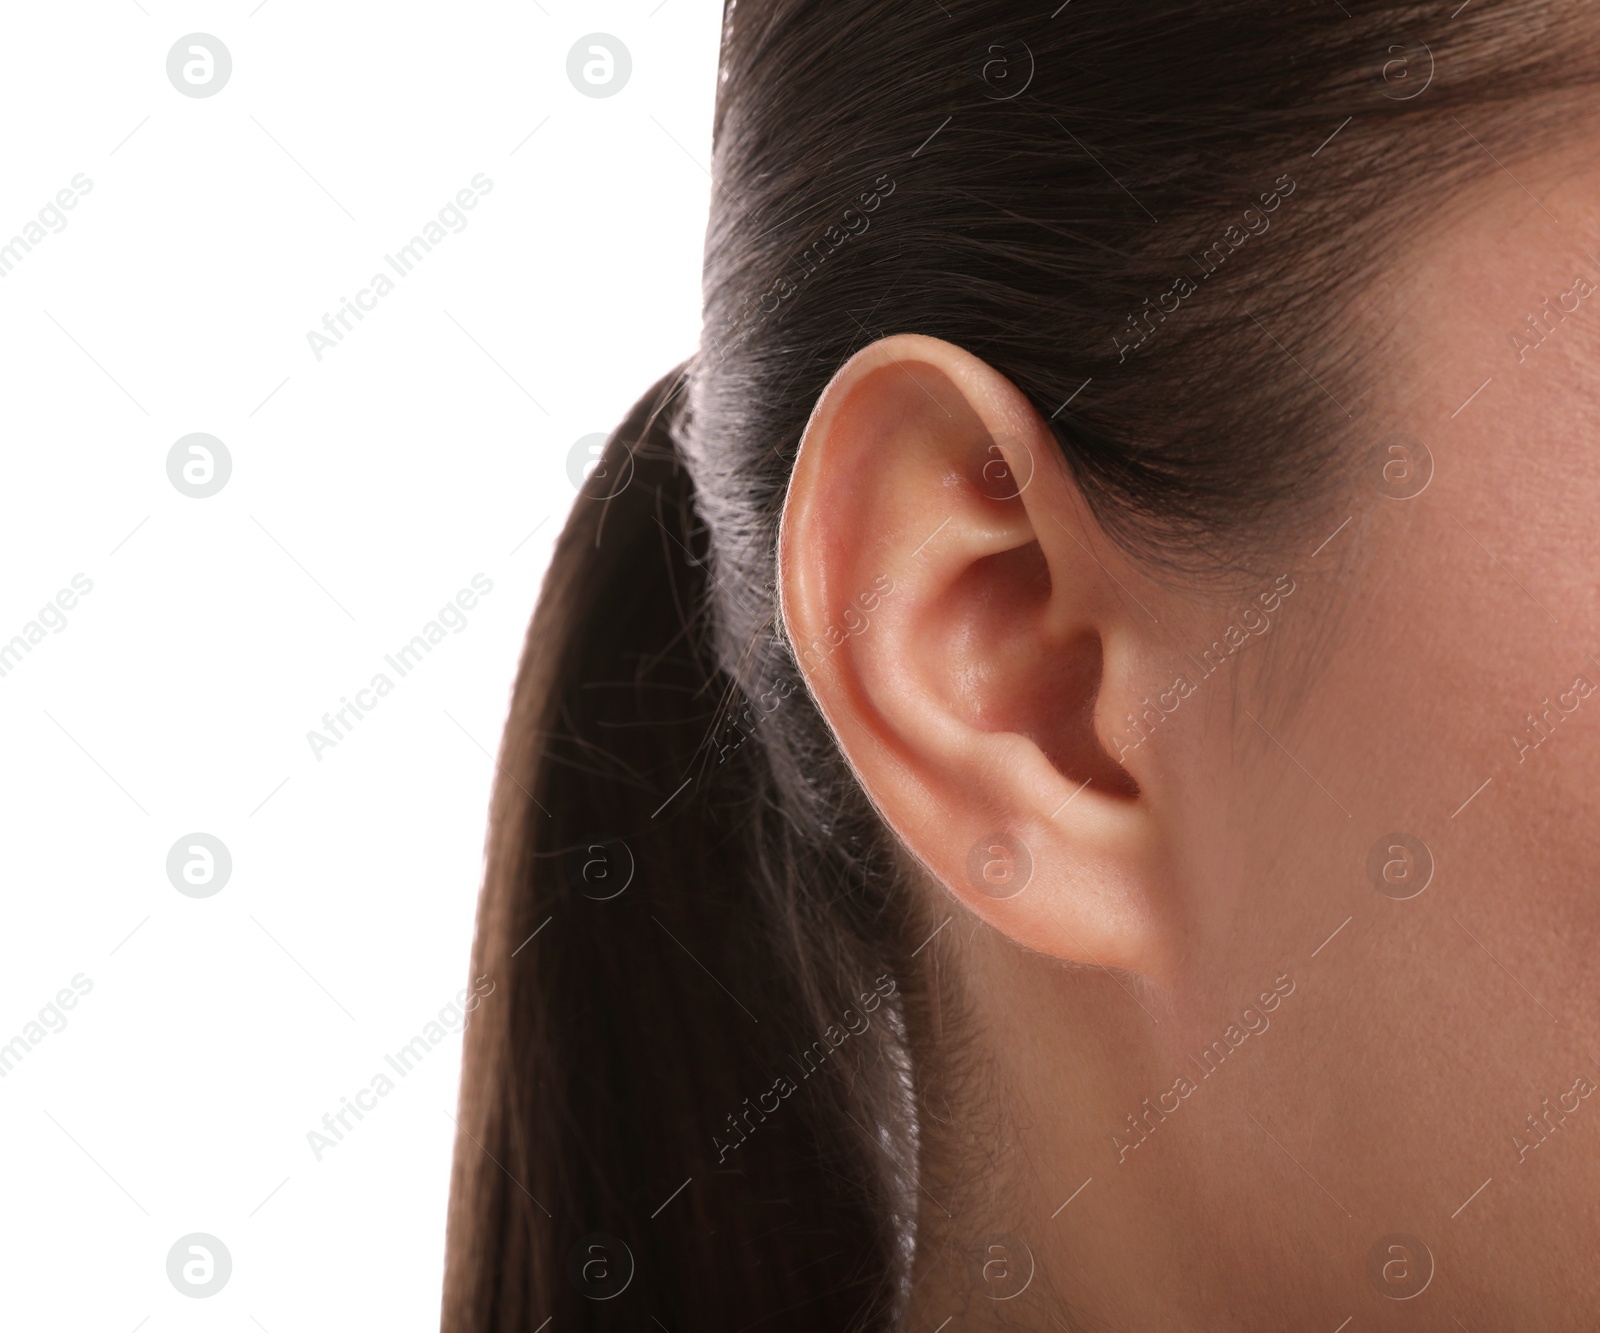 Photo of Woman on white background, closeup of ear